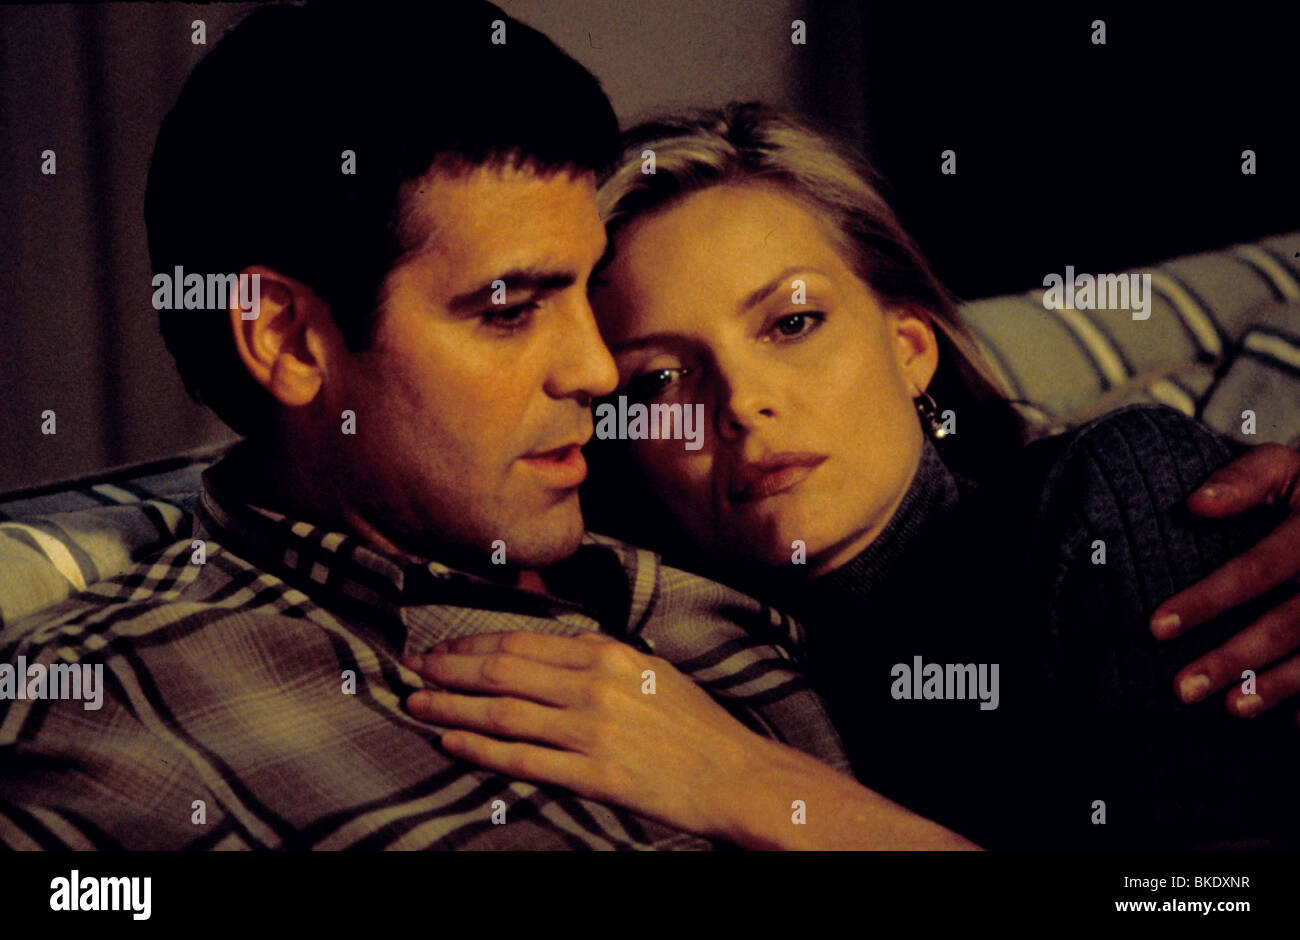 ONE FINE DAY (1996) GEORGE CLOONEY, MICHELLE PFEIFFER OFD 096 Stock Photo